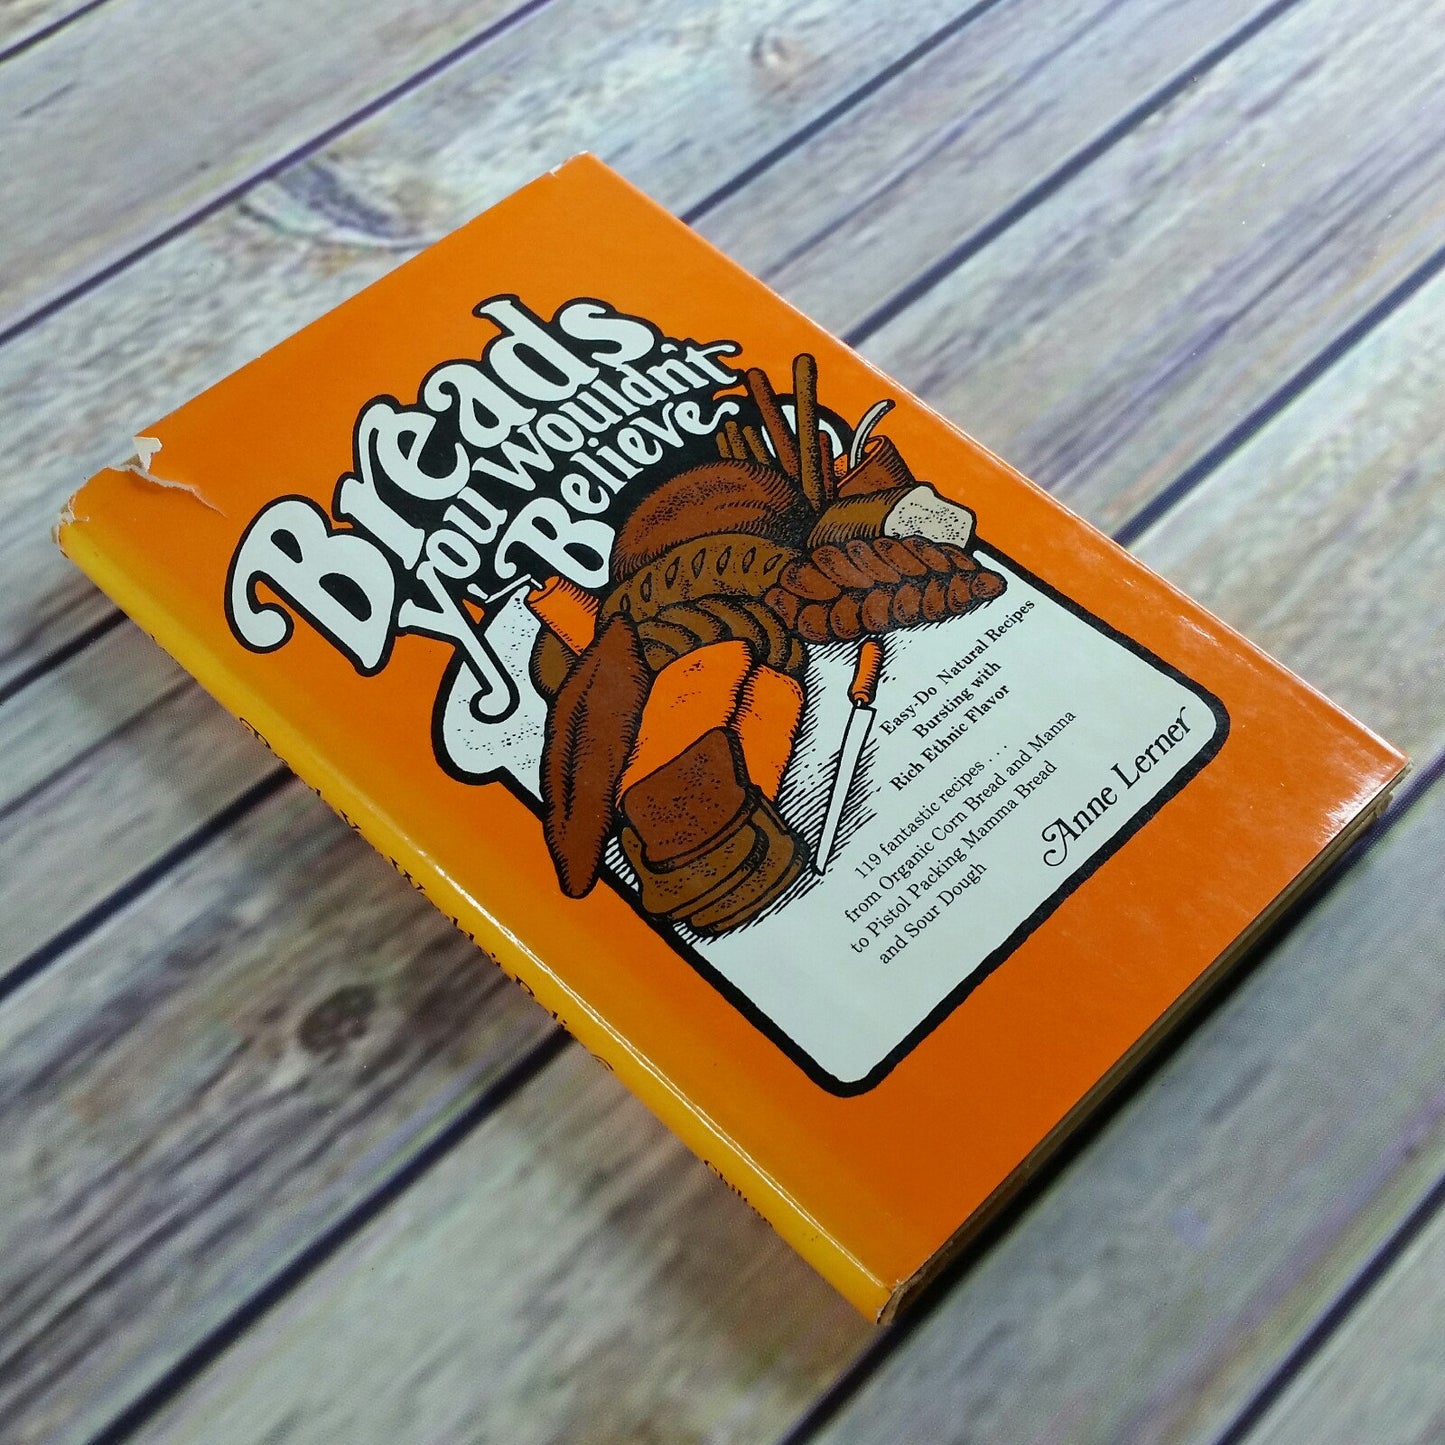 Vintage Cookbook Breads You Wouldnt Believe Bread Recipes Anne Lerner 1974 Natural Recipes Hardcover with Dust Jacket